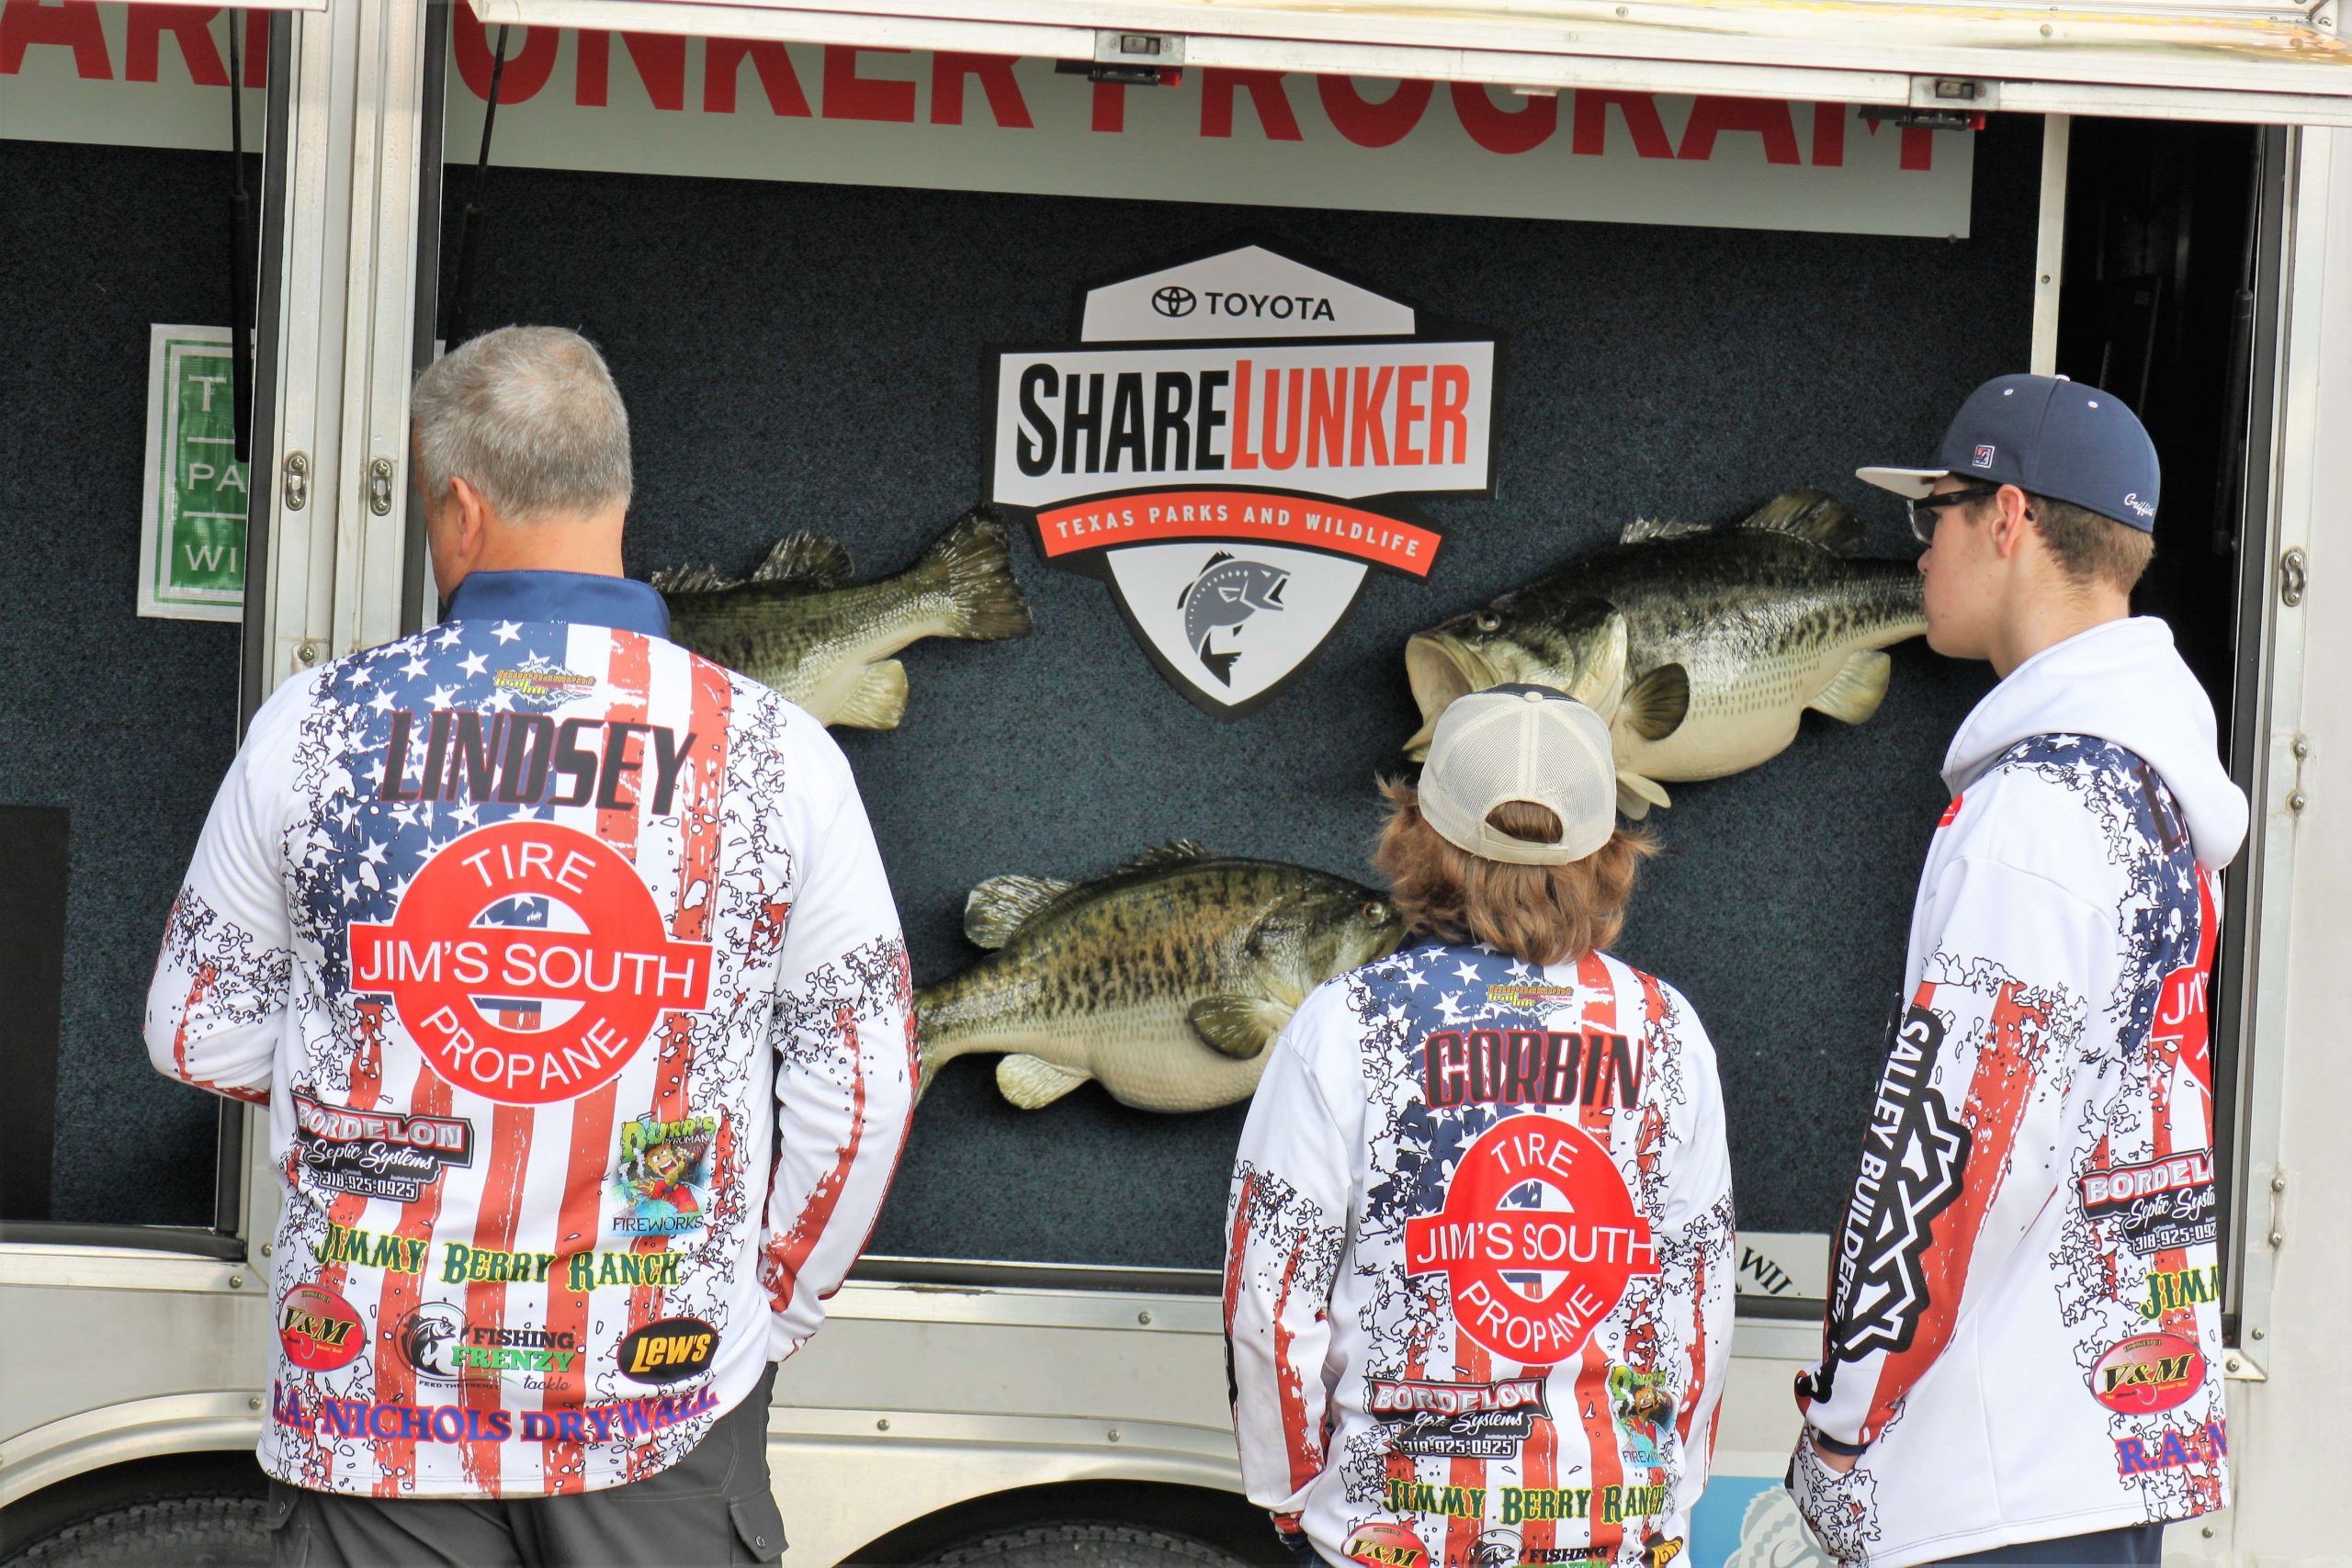 These guys get a glimpse of some Toyota ShareLunker bass on display here during registration. How much you think these guys would give to pull one of those bucket mouths from Toledo Bend Reservoir Sunday?